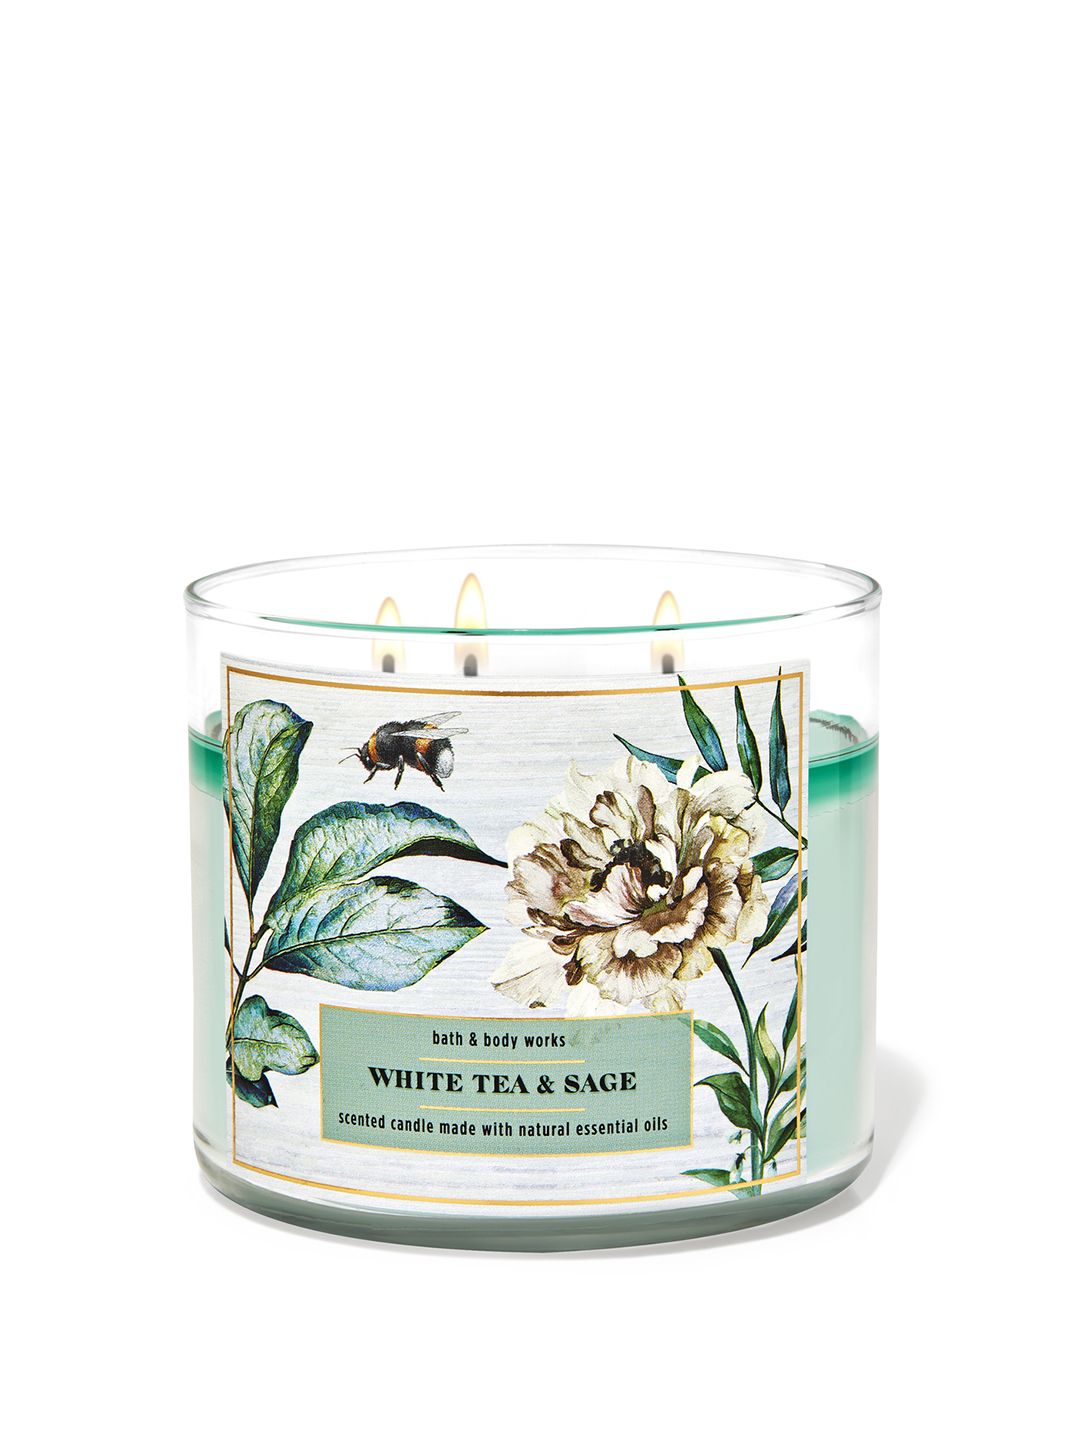 Bath & Body Works White Tea & Sage 3-Wick Scented Candle with Essential Oil - 411 g Price in India